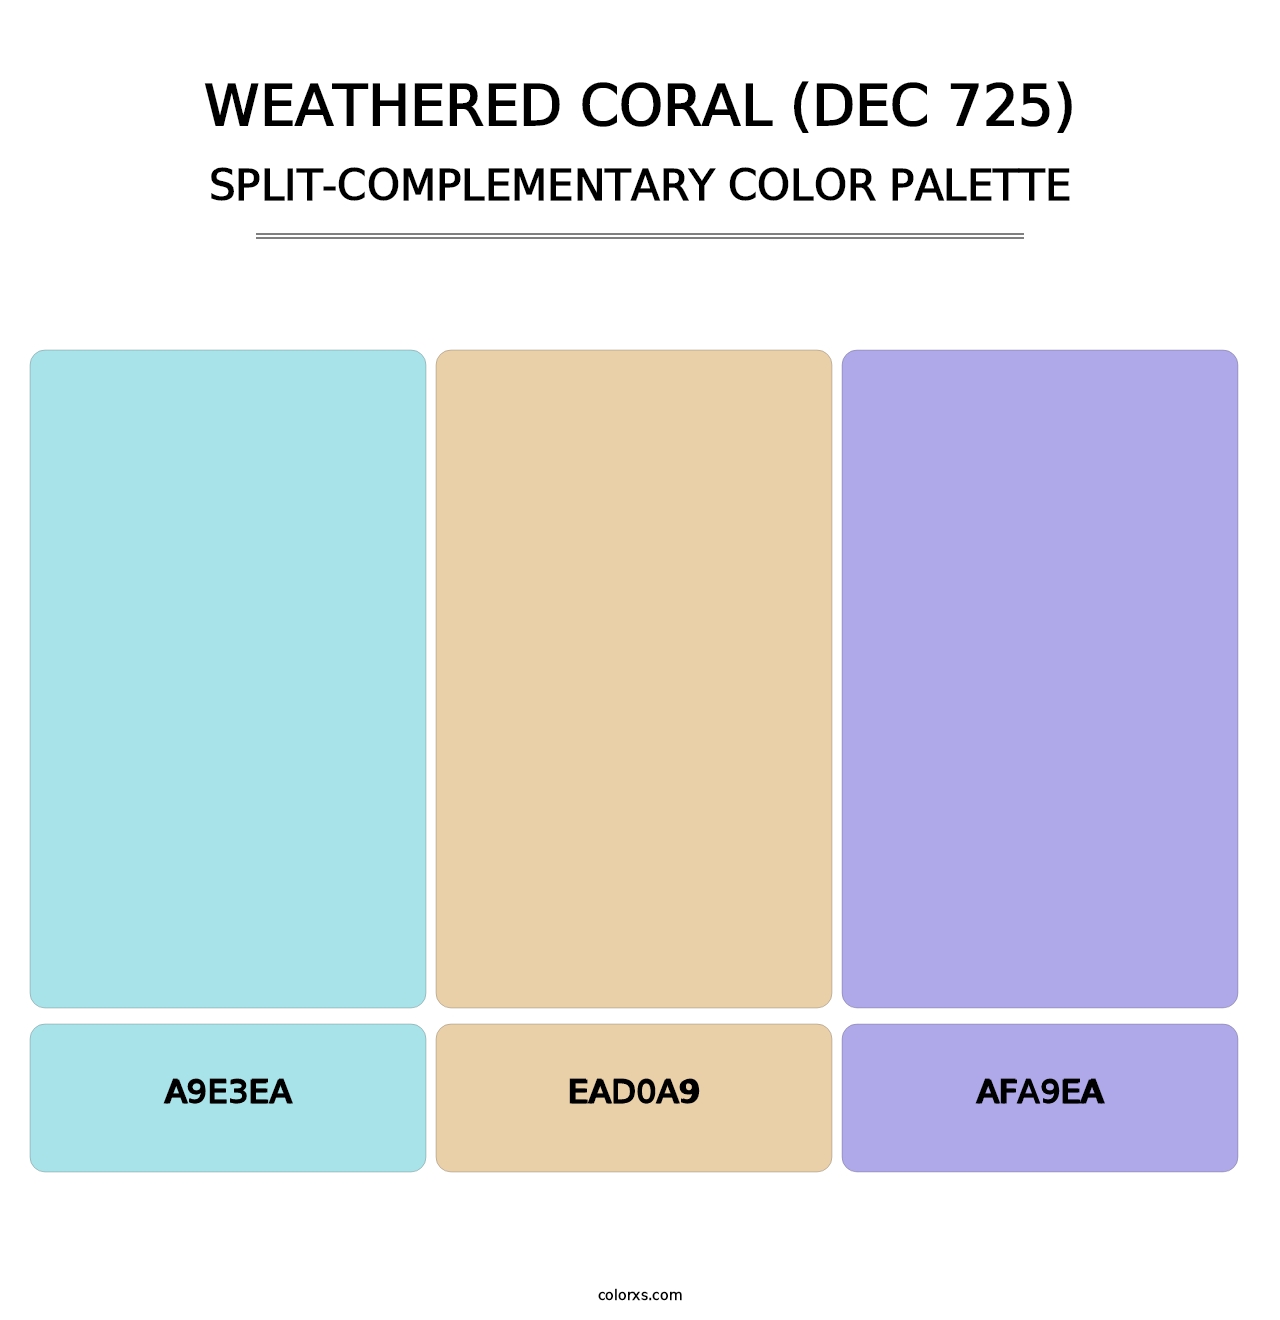 Weathered Coral (DEC 725) - Split-Complementary Color Palette